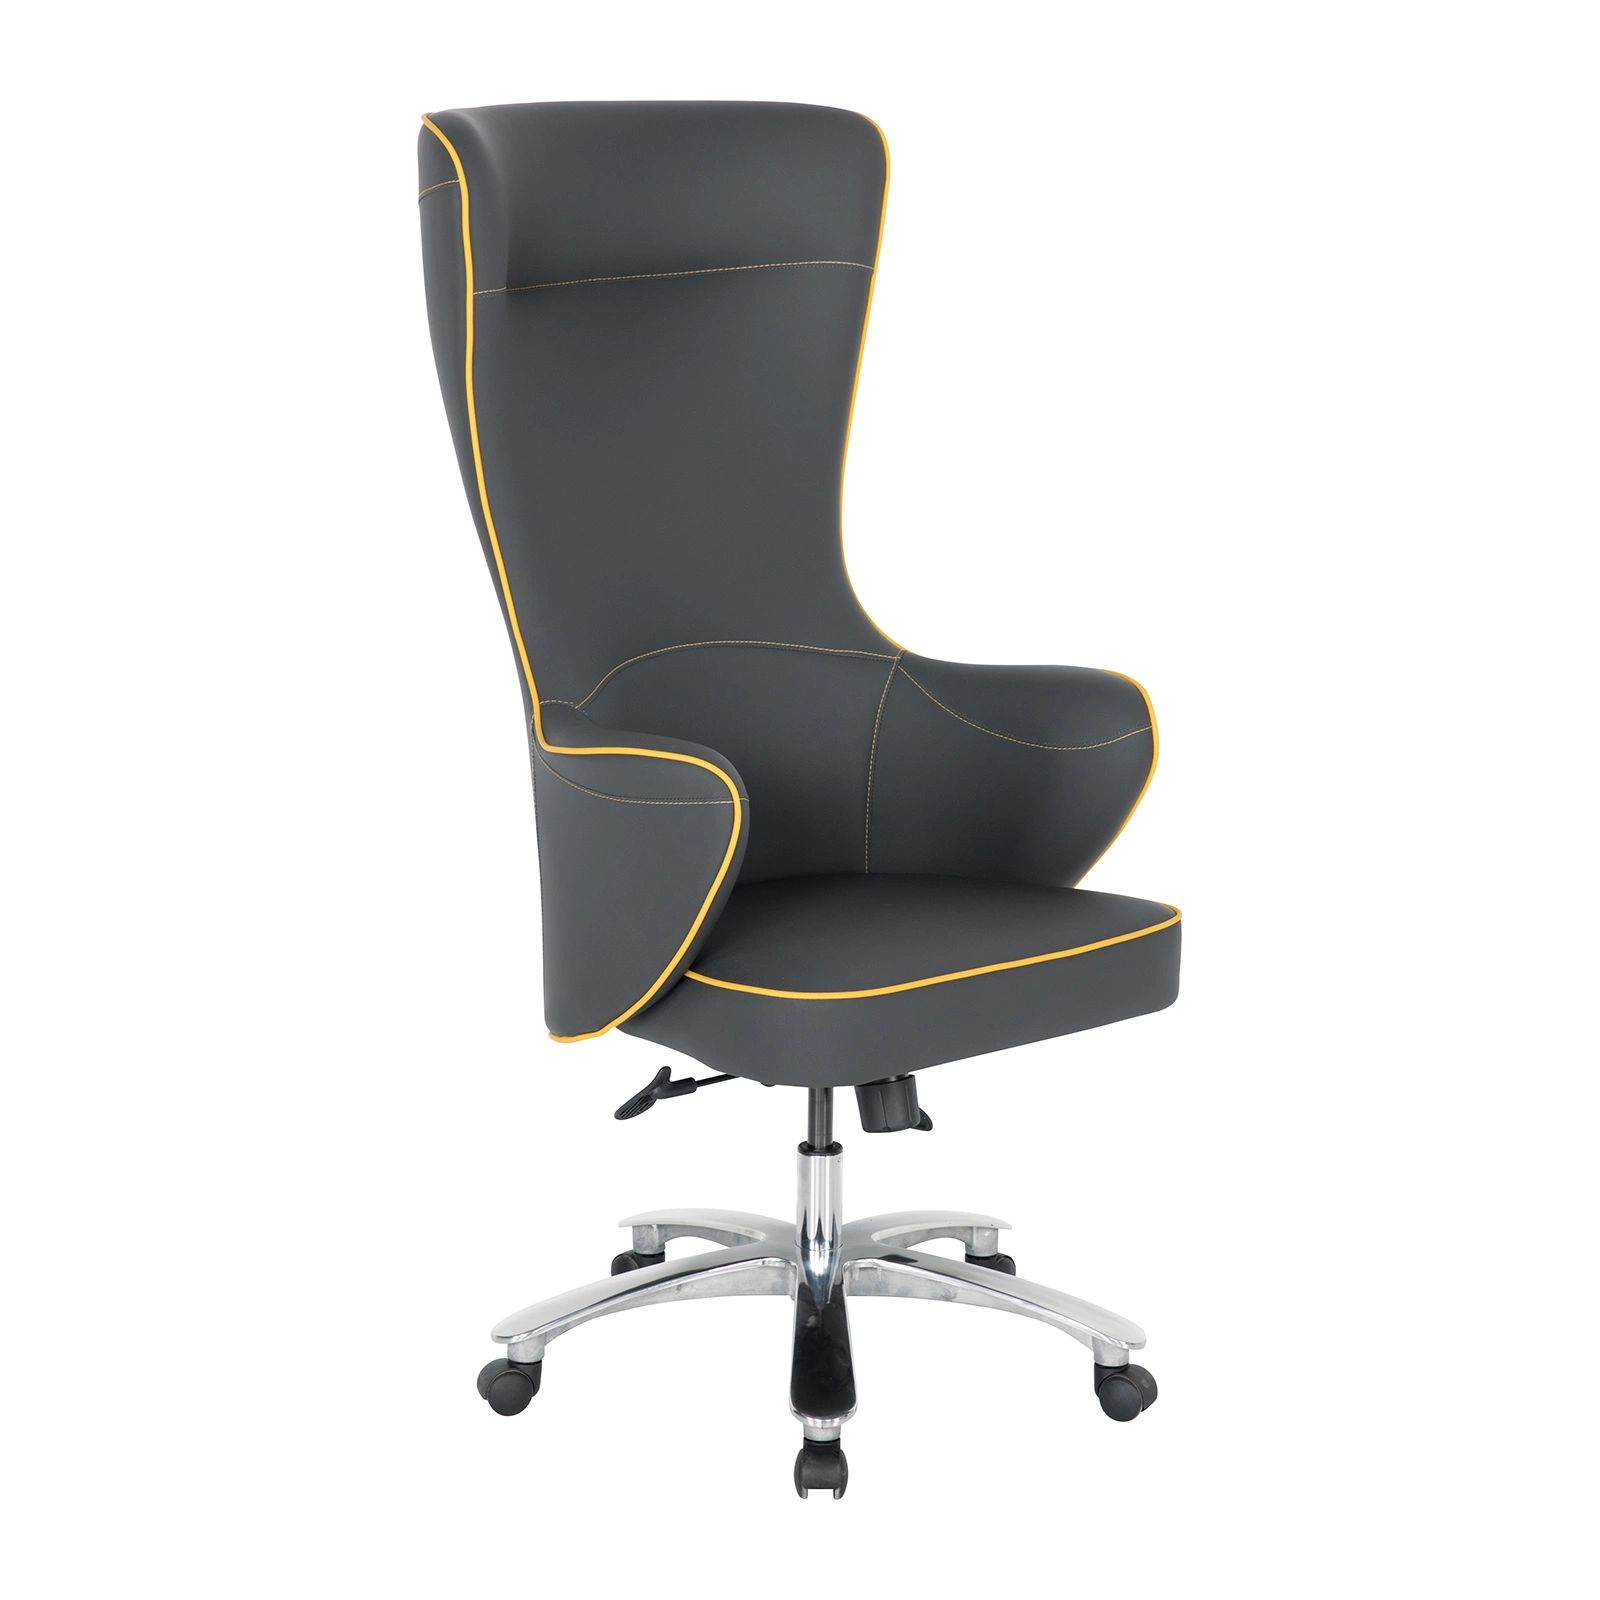 High Back Office Chair,  Mid Back Office Chair, Executive Chair,manager chair, Ergonomi Office Chair